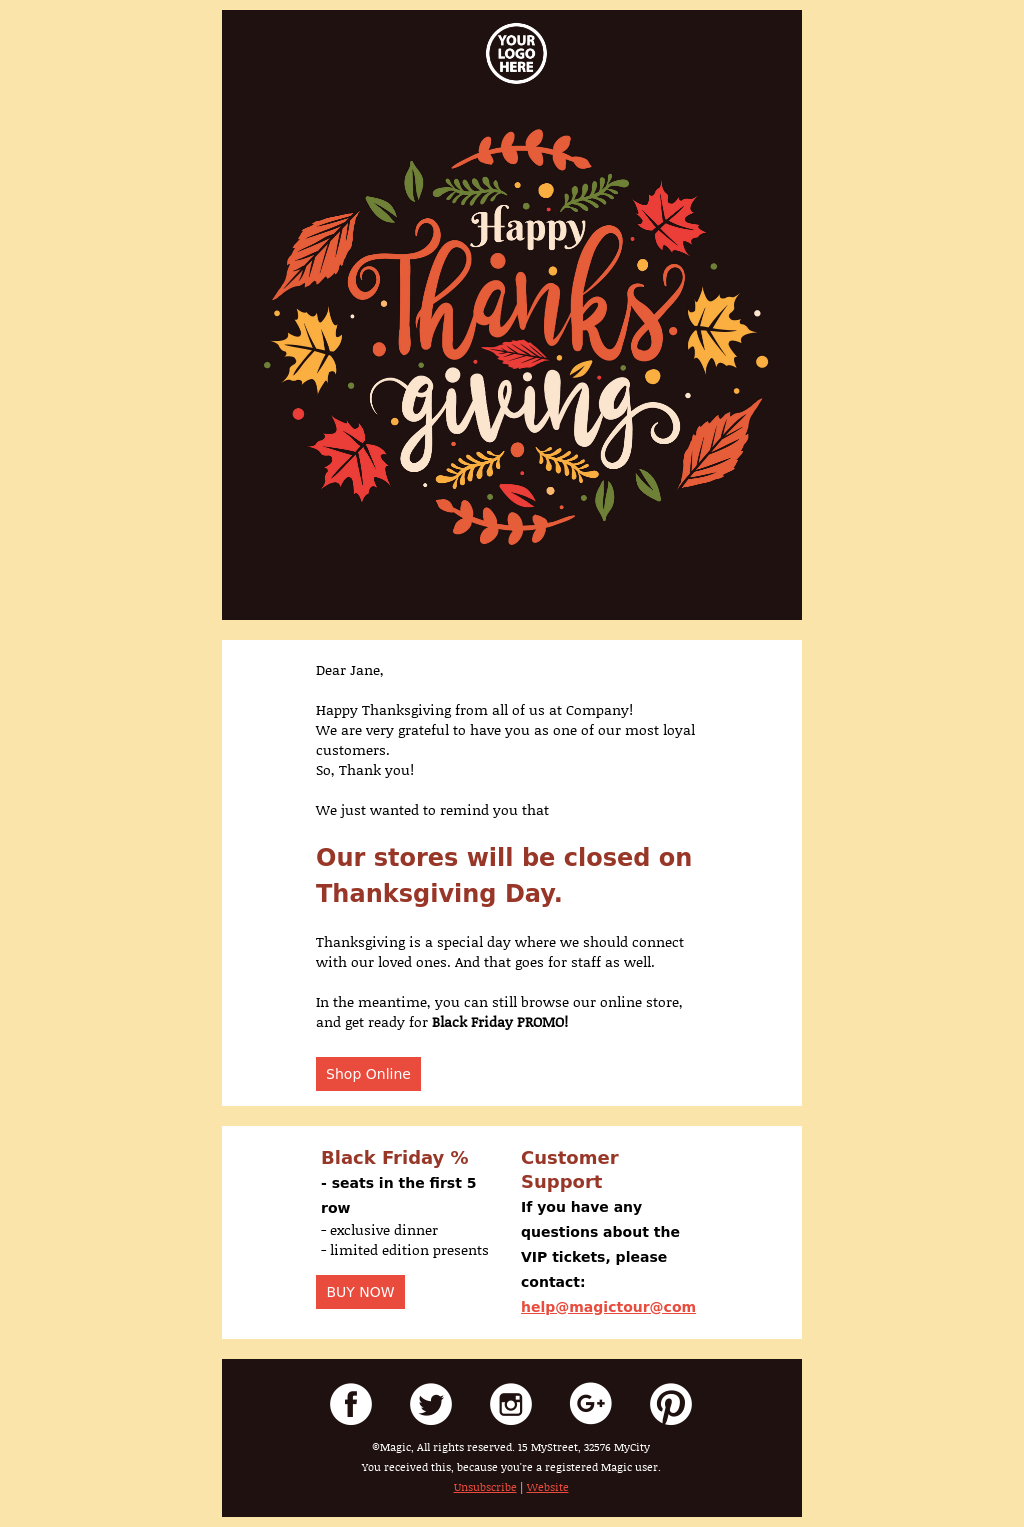 Office (Stores) Closed for Thanksgiving Email Template